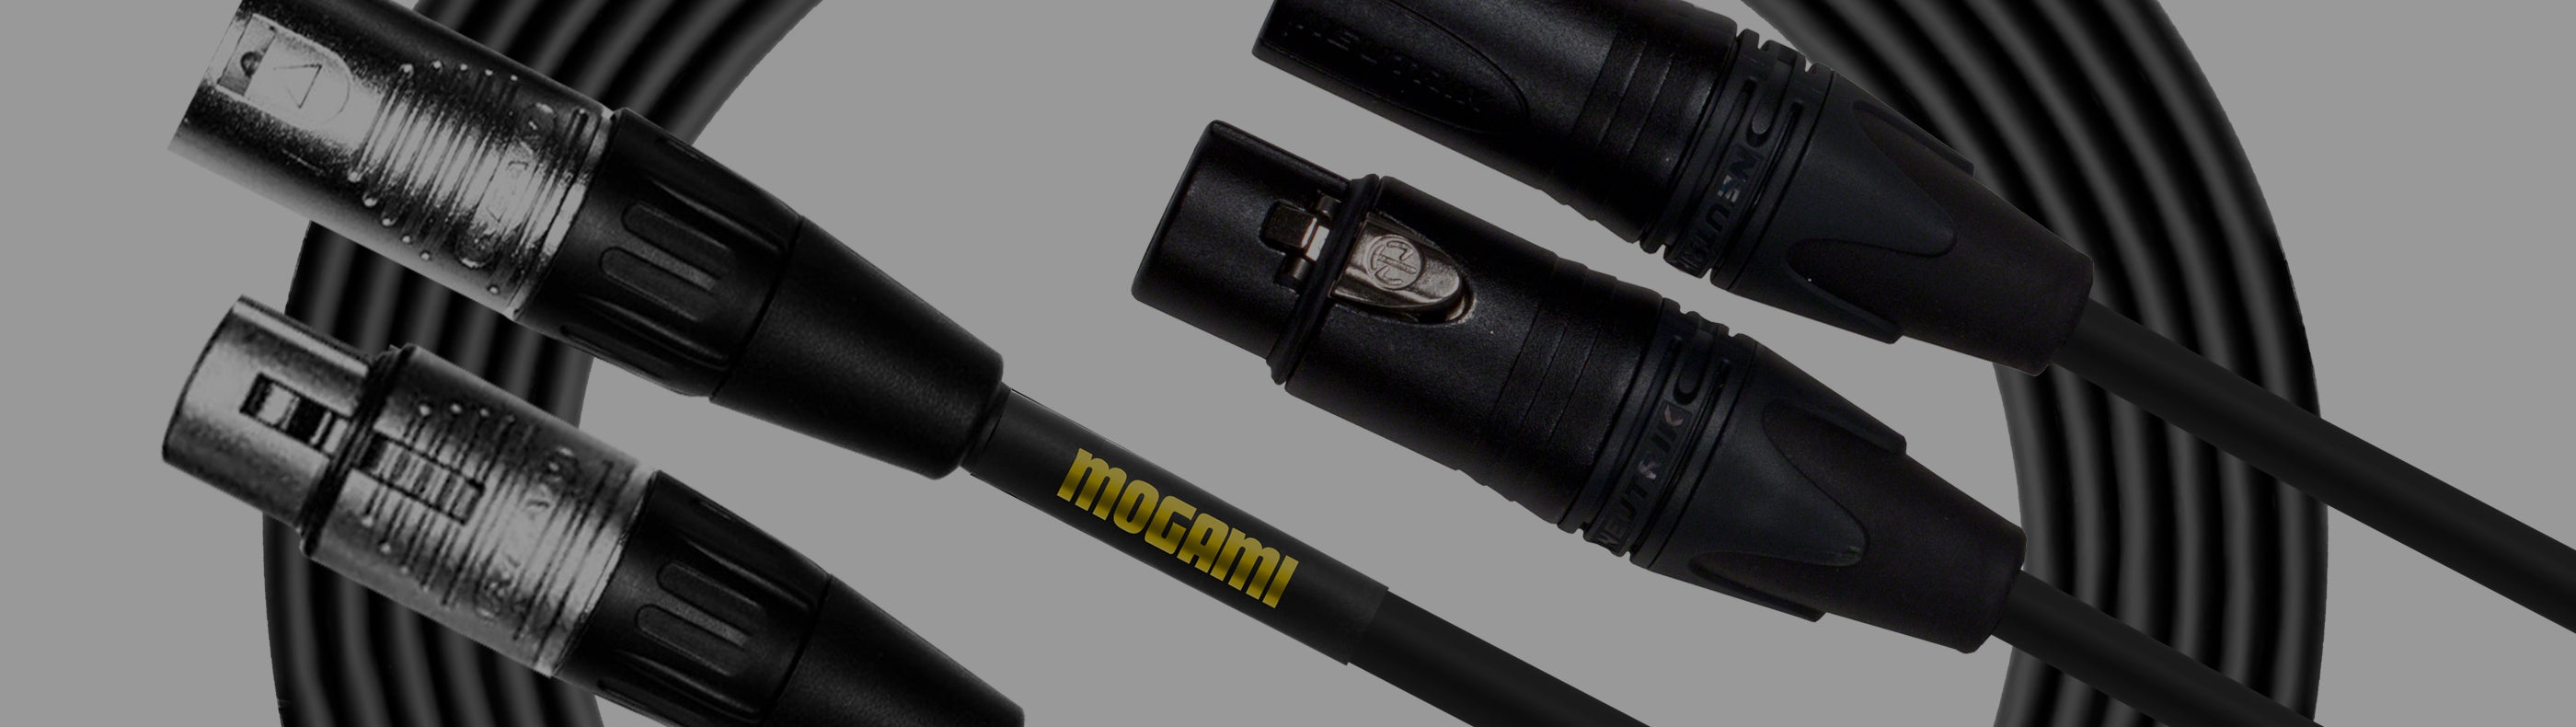 Mogami Microphone Cables